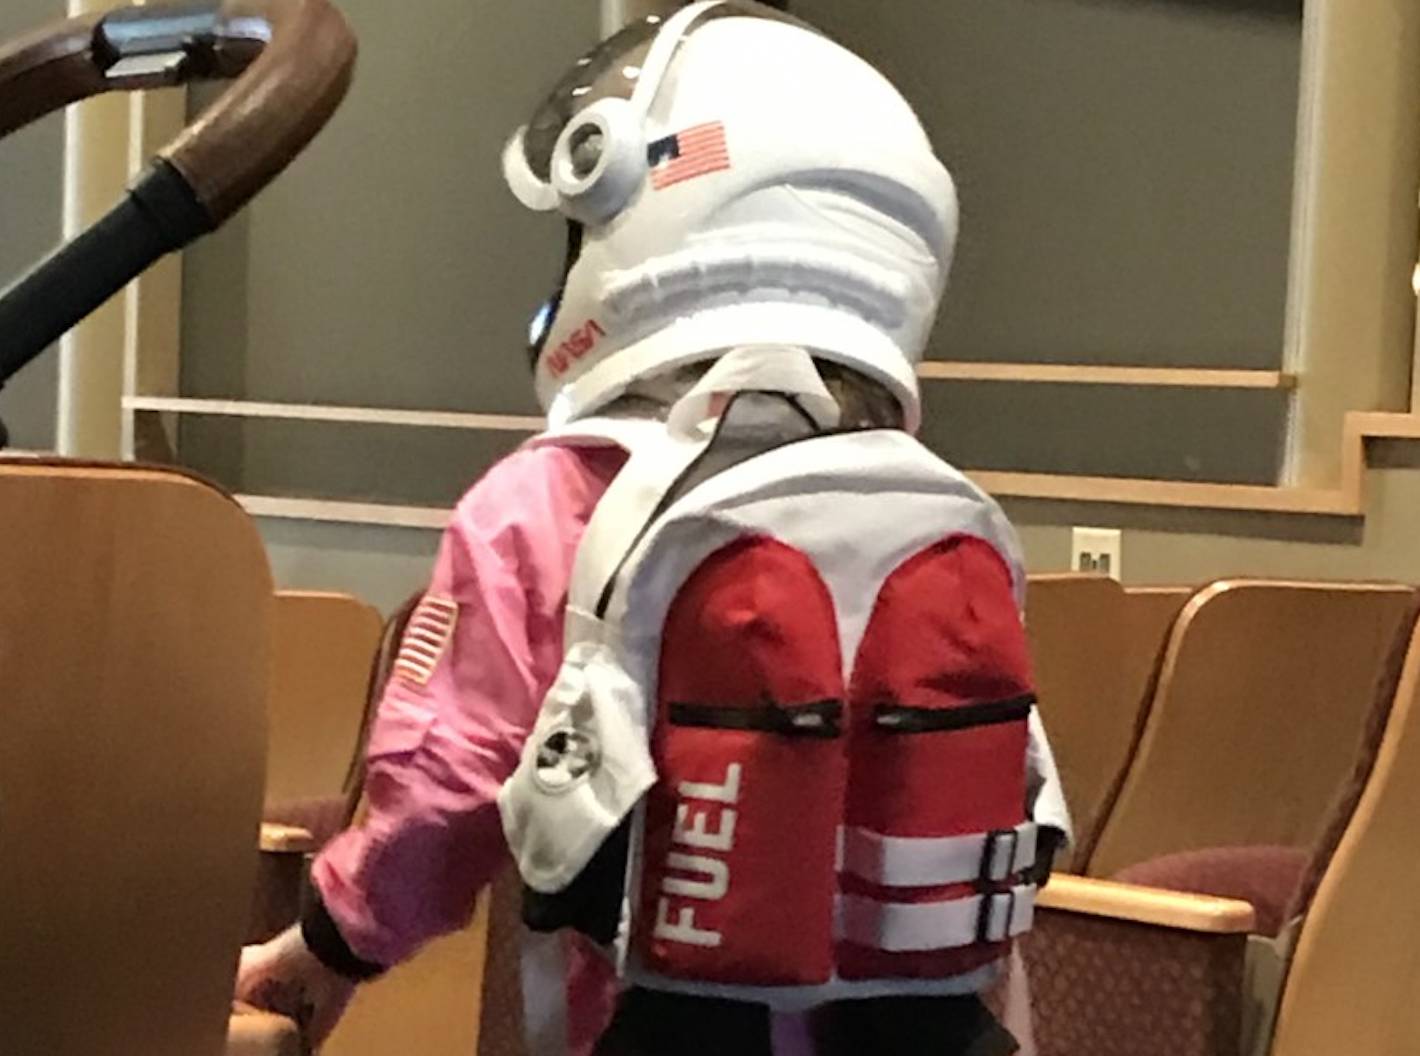 Young astronaut at Roger That!